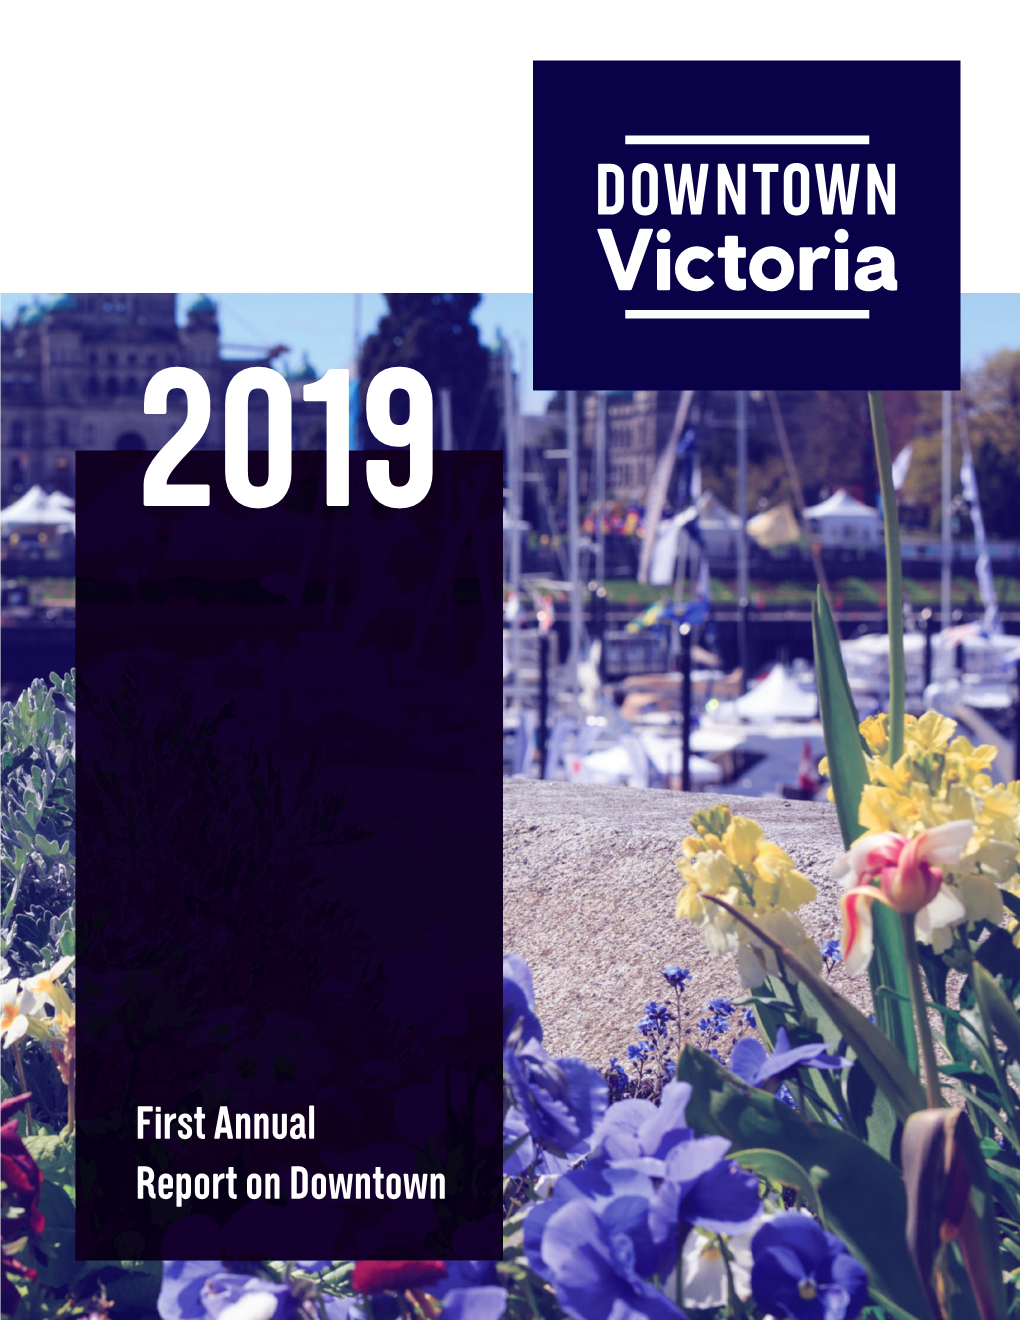 First Annual Report on Downtown